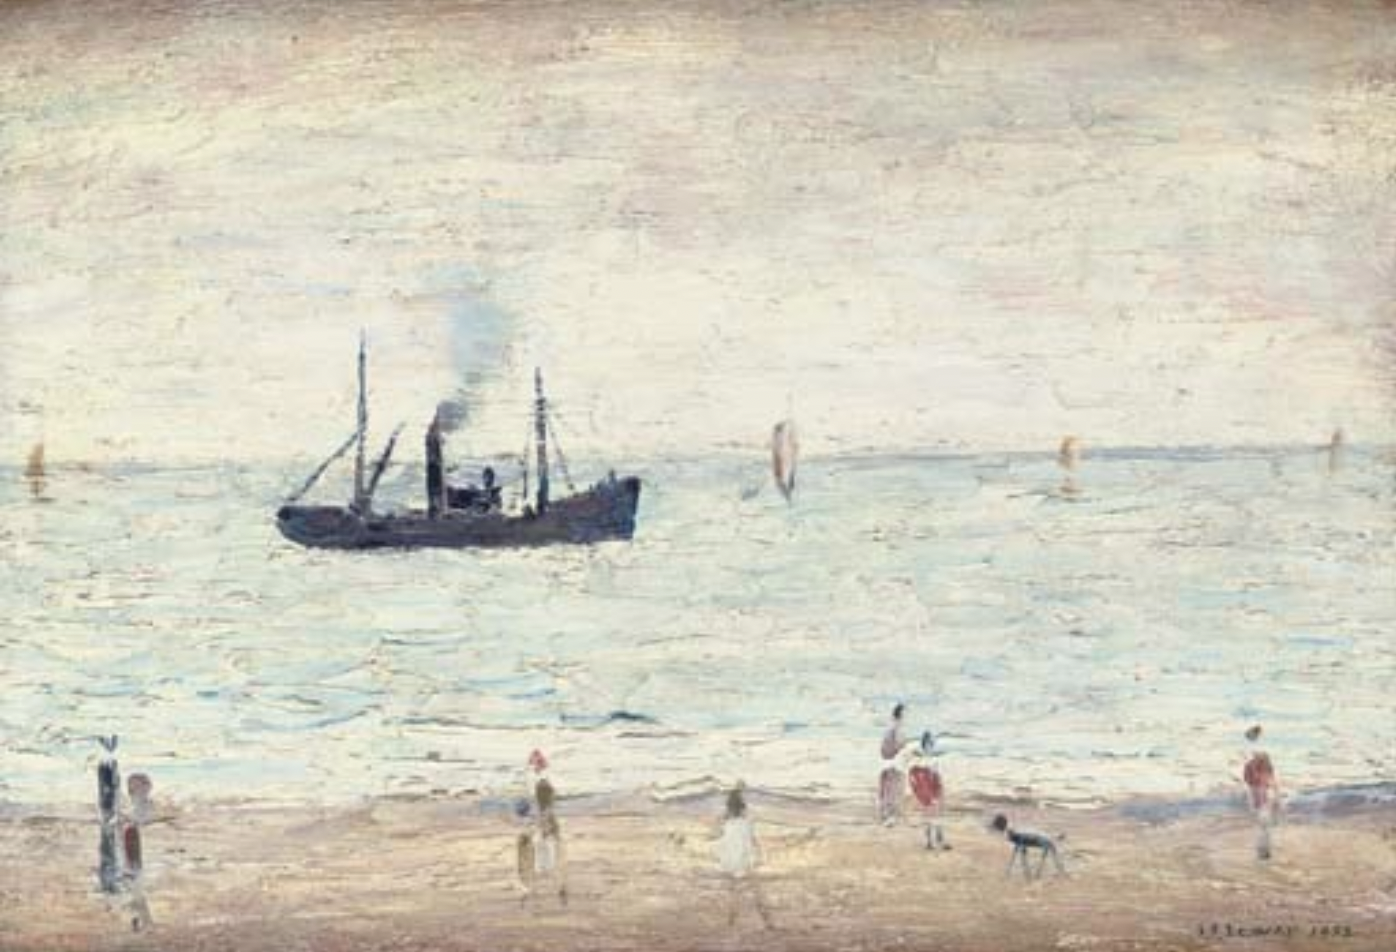 Seascape with figures (1952) by Laurence Stephen Lowry (1887 - 1976), English artist.